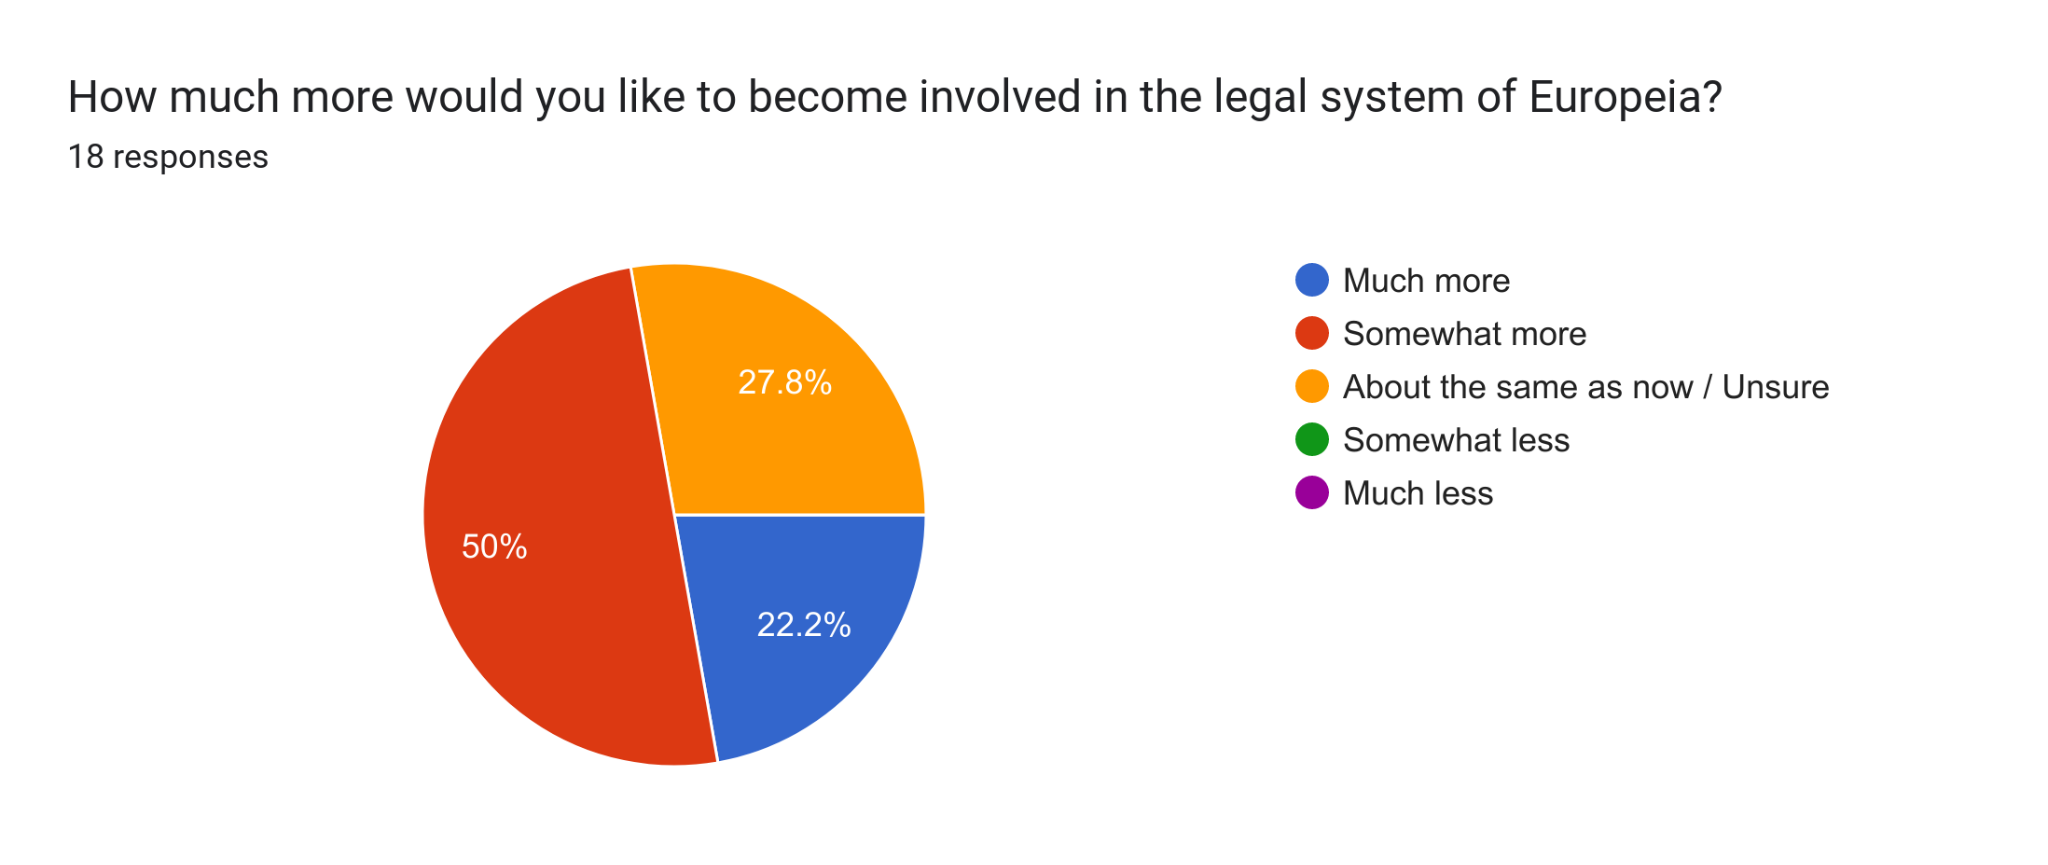 Forms response chart. Question title: How much more would you like to become involved in the legal system of Europeia?. Number of responses: 18 responses.